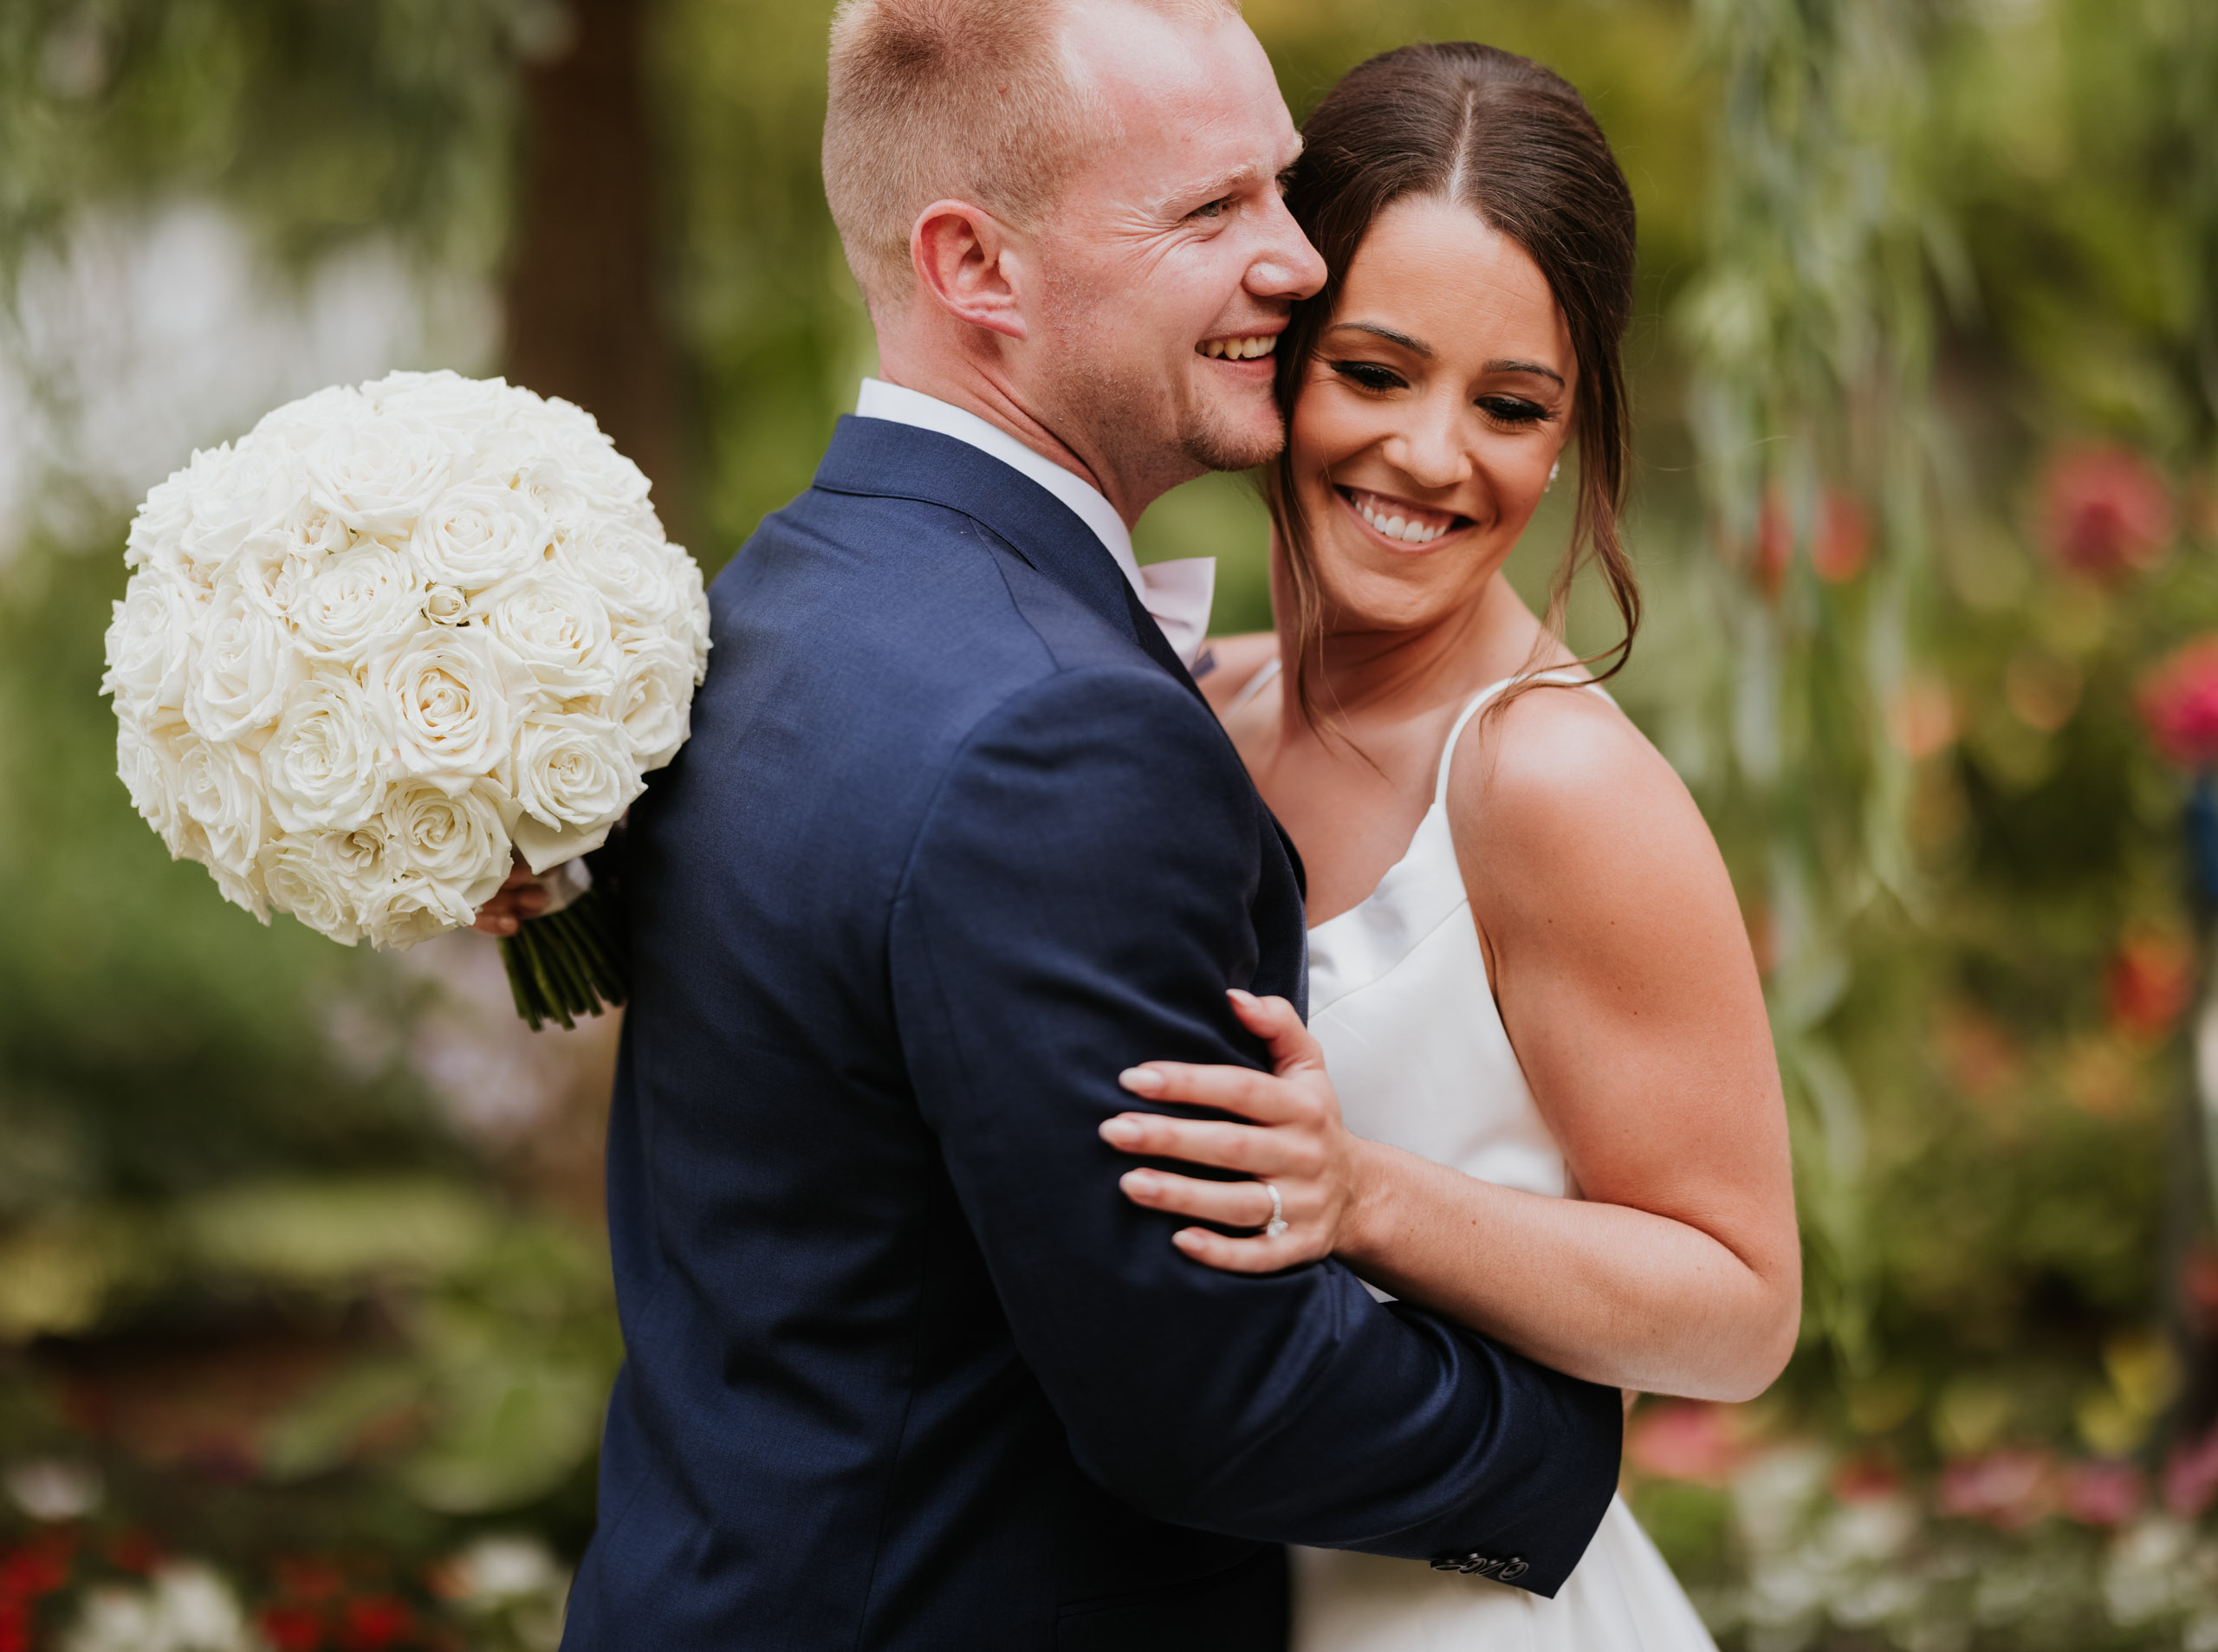 https://breannapluskevin.com/wp-content/uploads/photo-gallery/imported_from_media_libray/kiana-lodge-wedding-bm-breanna-plus-kevin-13.jpg